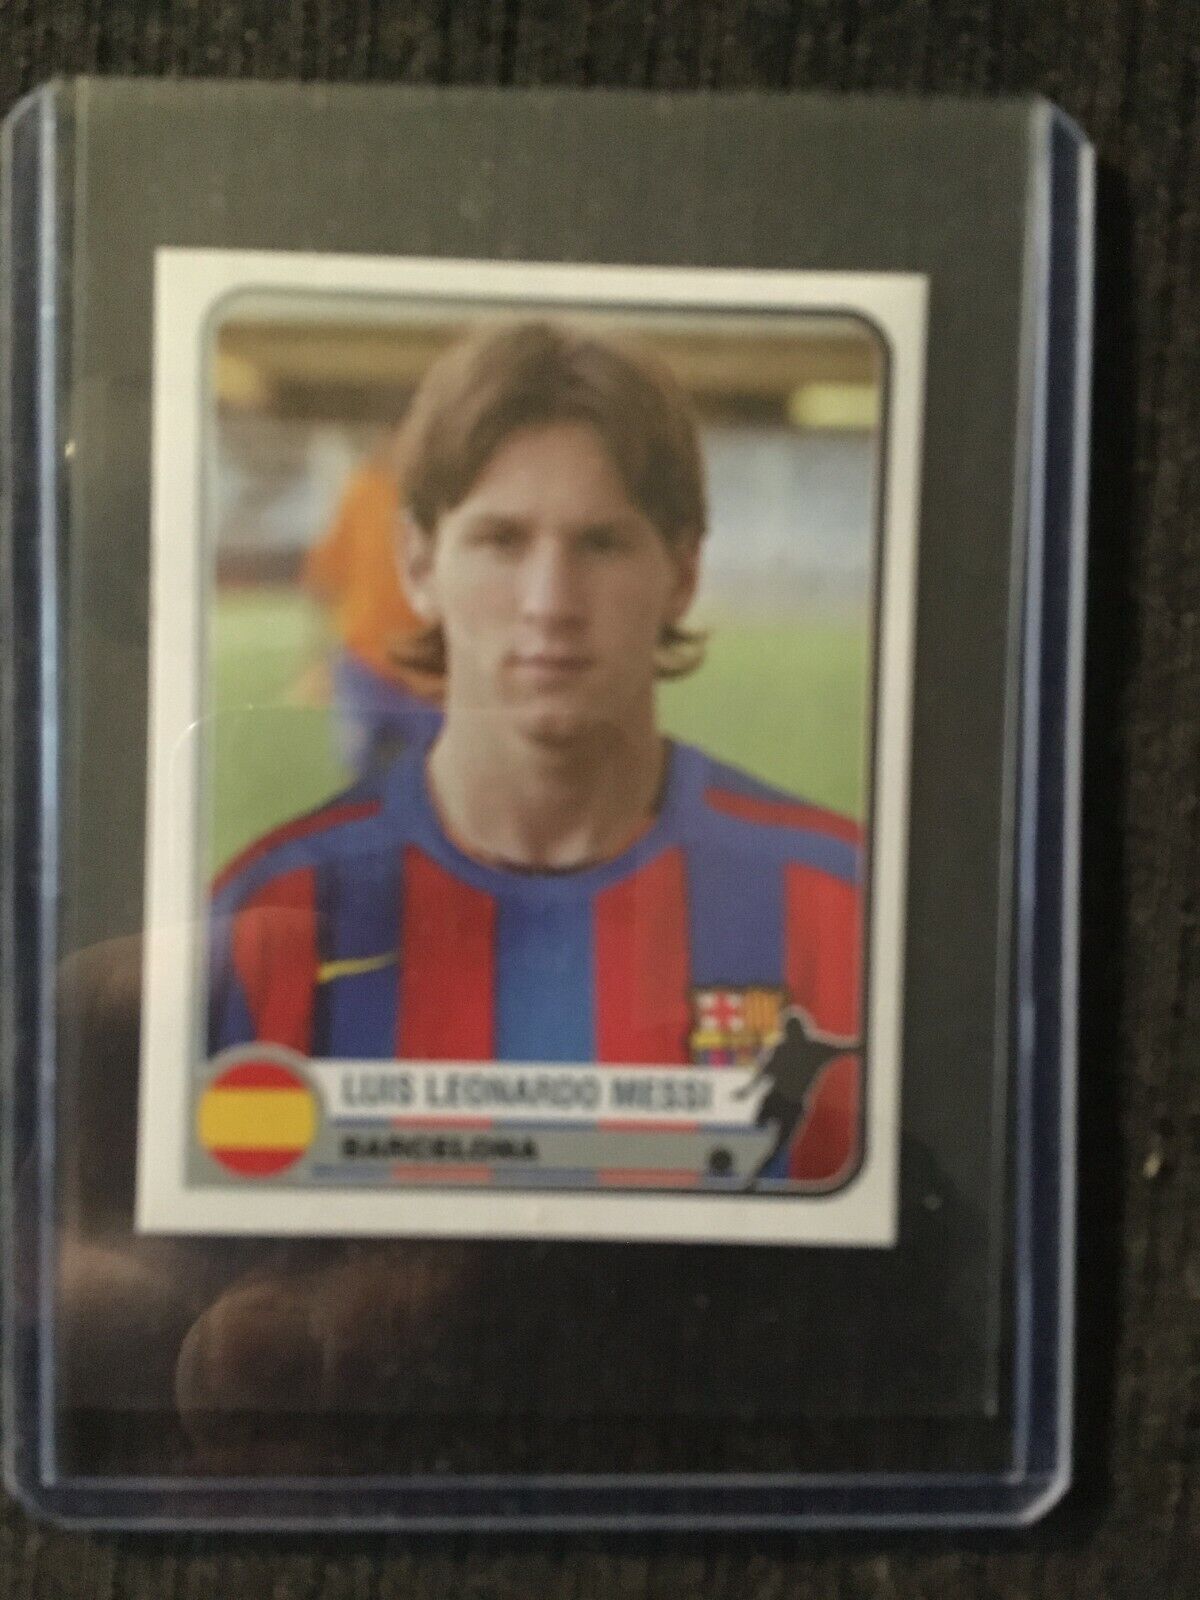 UEFA CHAMPIONS OF EUROPE 1955/2005 MESSI BARCELONE # 75 ROOKIE 2 SANDERS STICKER